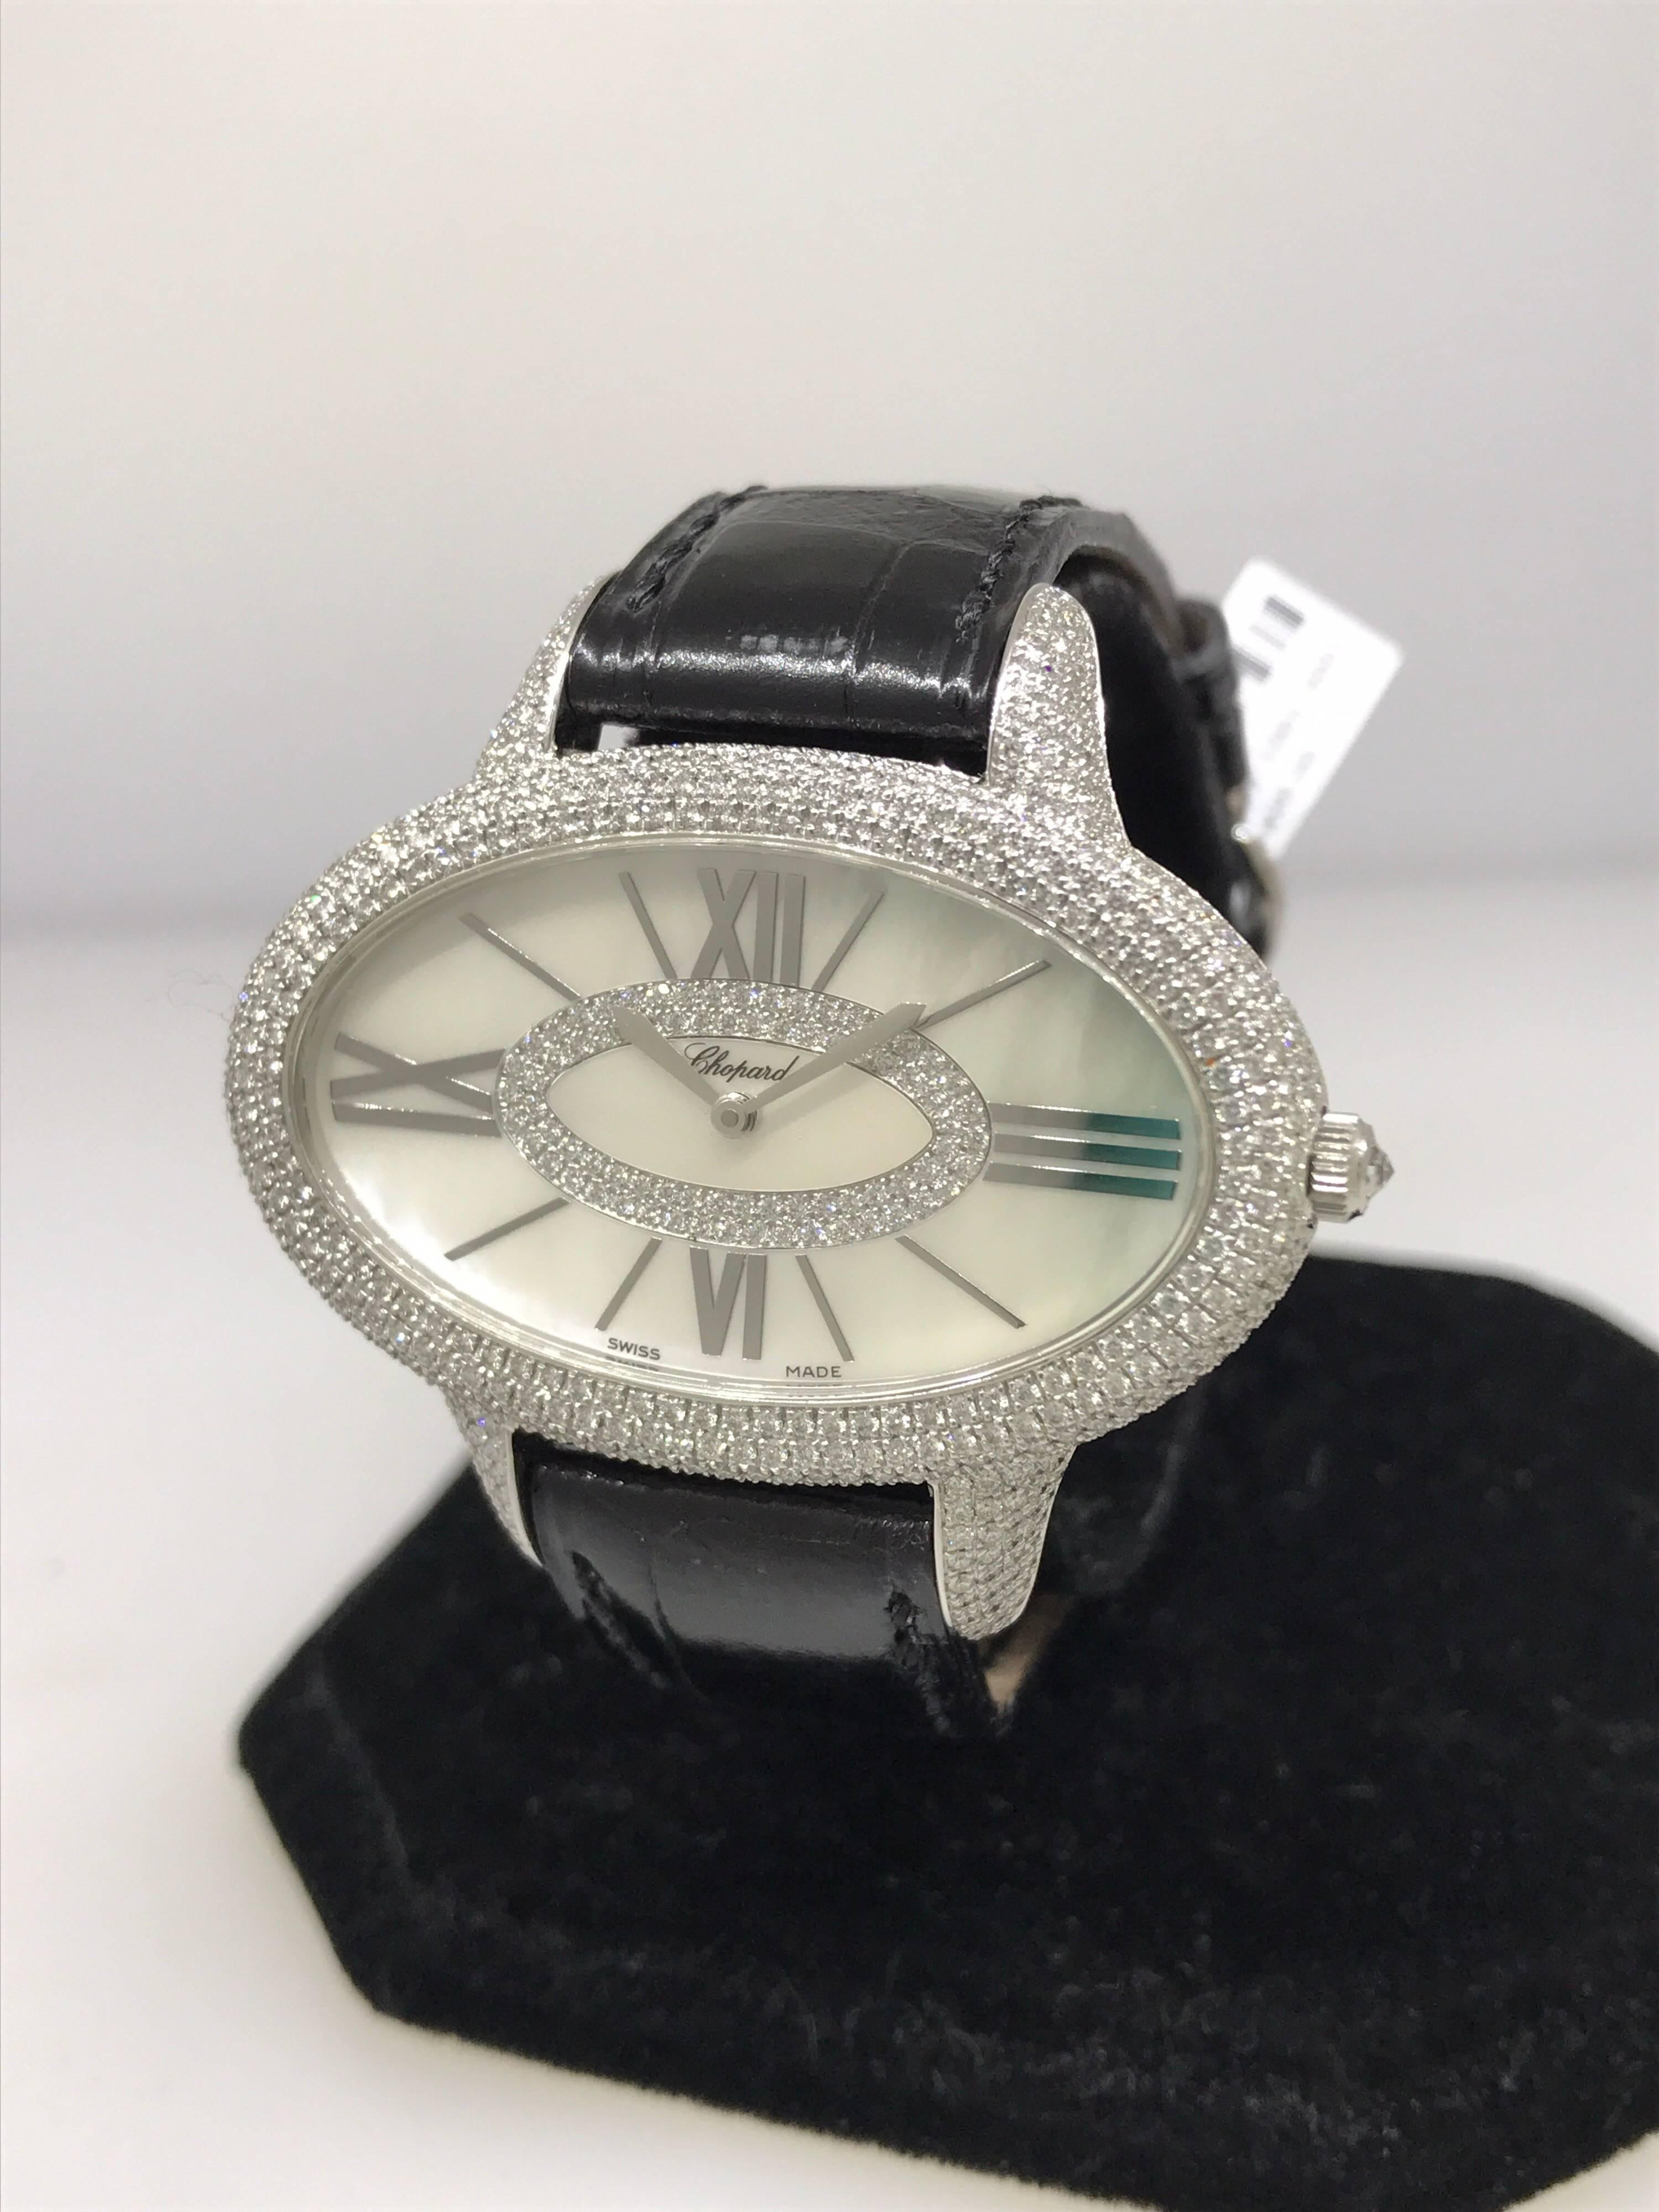 Chopard Oblong Boutique Edition Oval Classique Lady's Watch

Model Number 13/9131-1001

100% Authentic 

Brand New

Comes with original Chopard box, certificate of authenticity and warranty, and jewels manual

18 Karat White Gold

546 Diamonds on